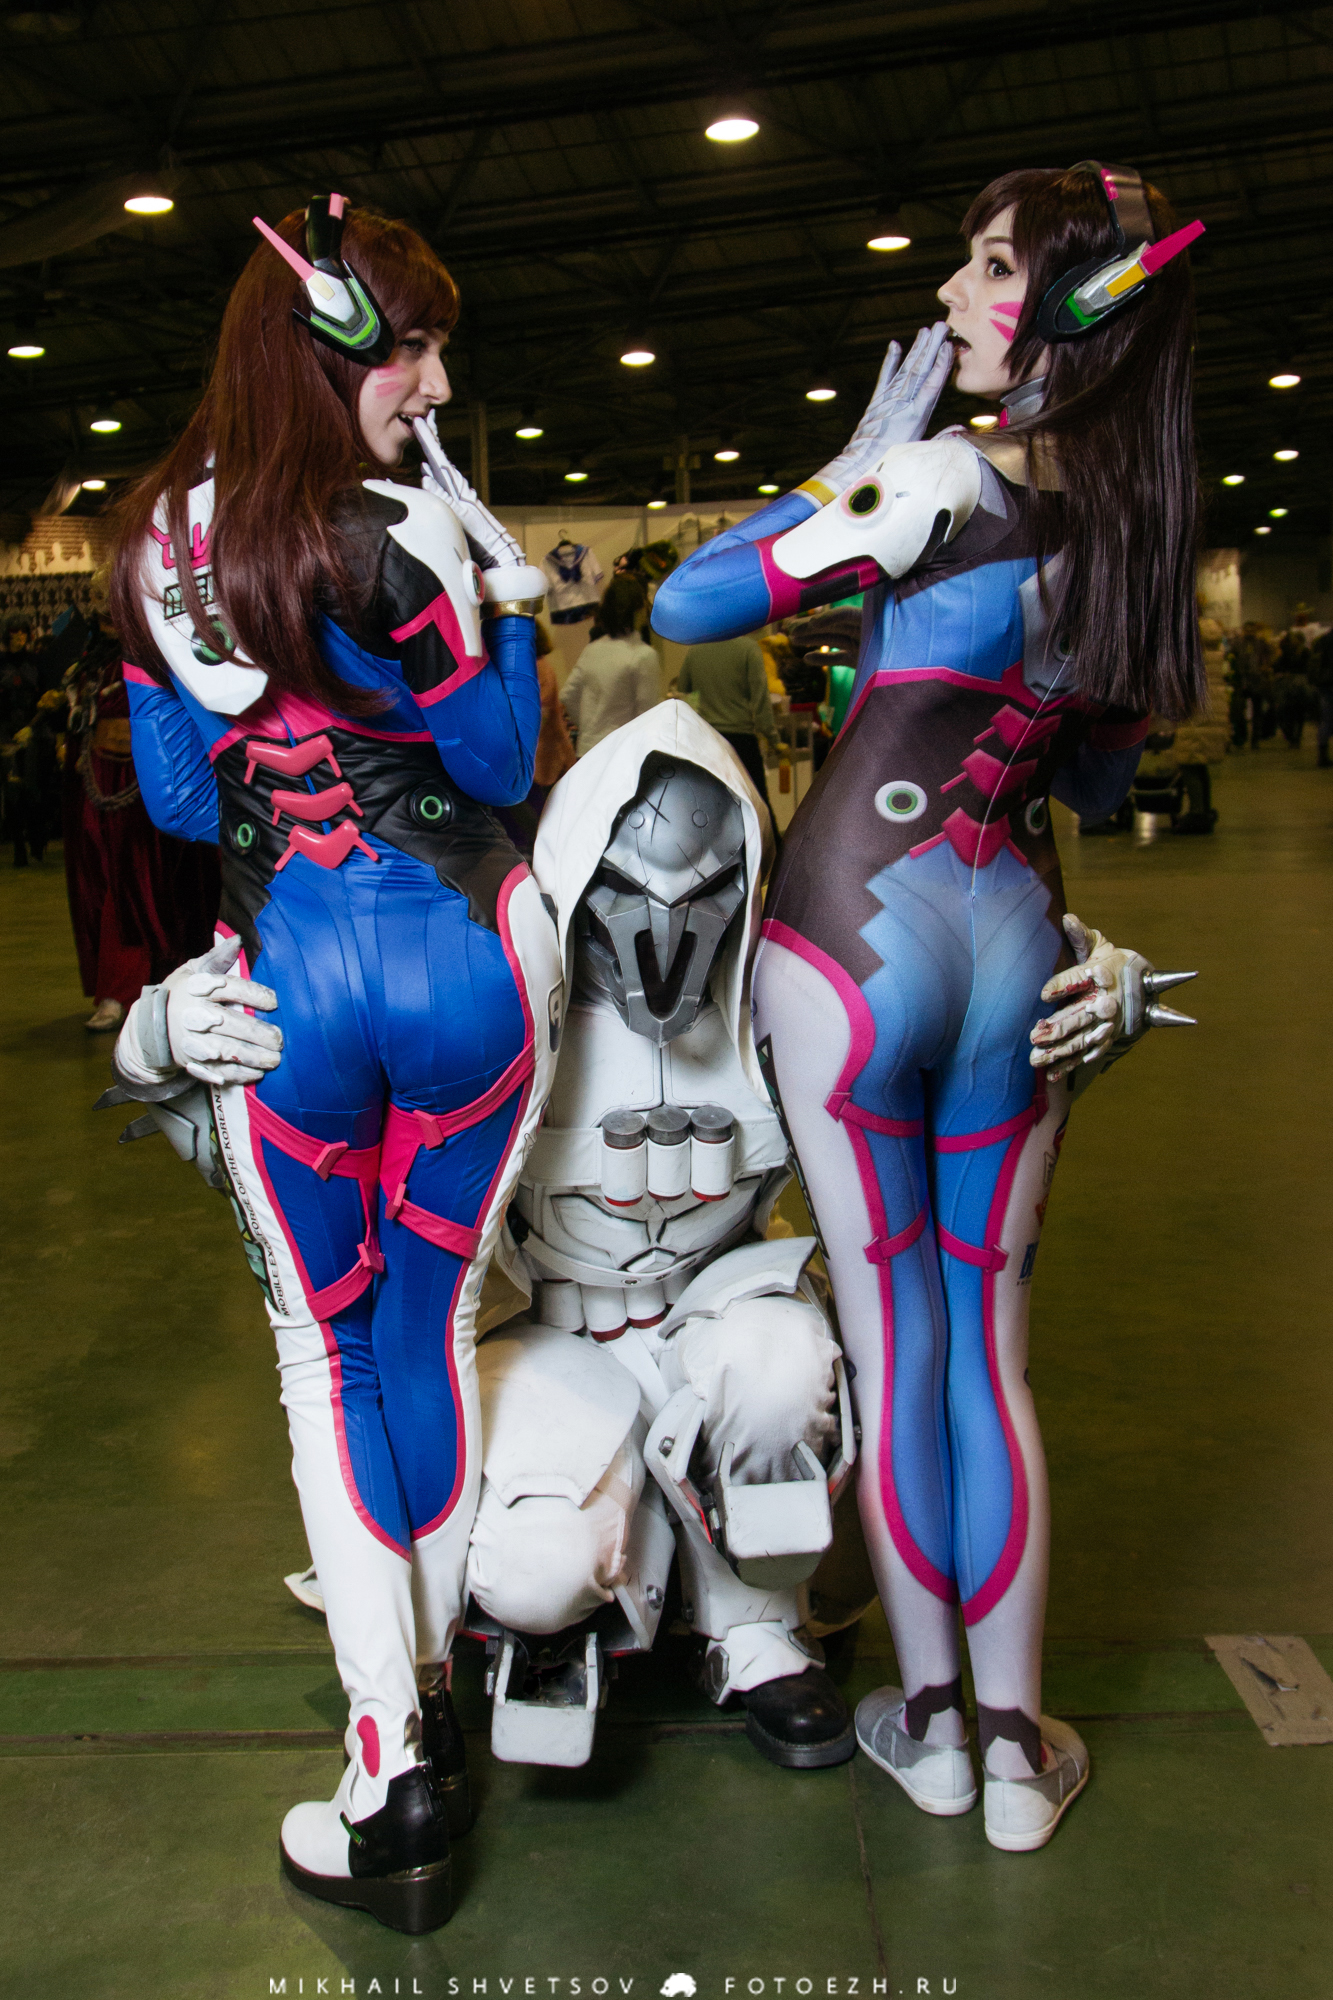 What Is It With Overwatch Cosplay And Butts?